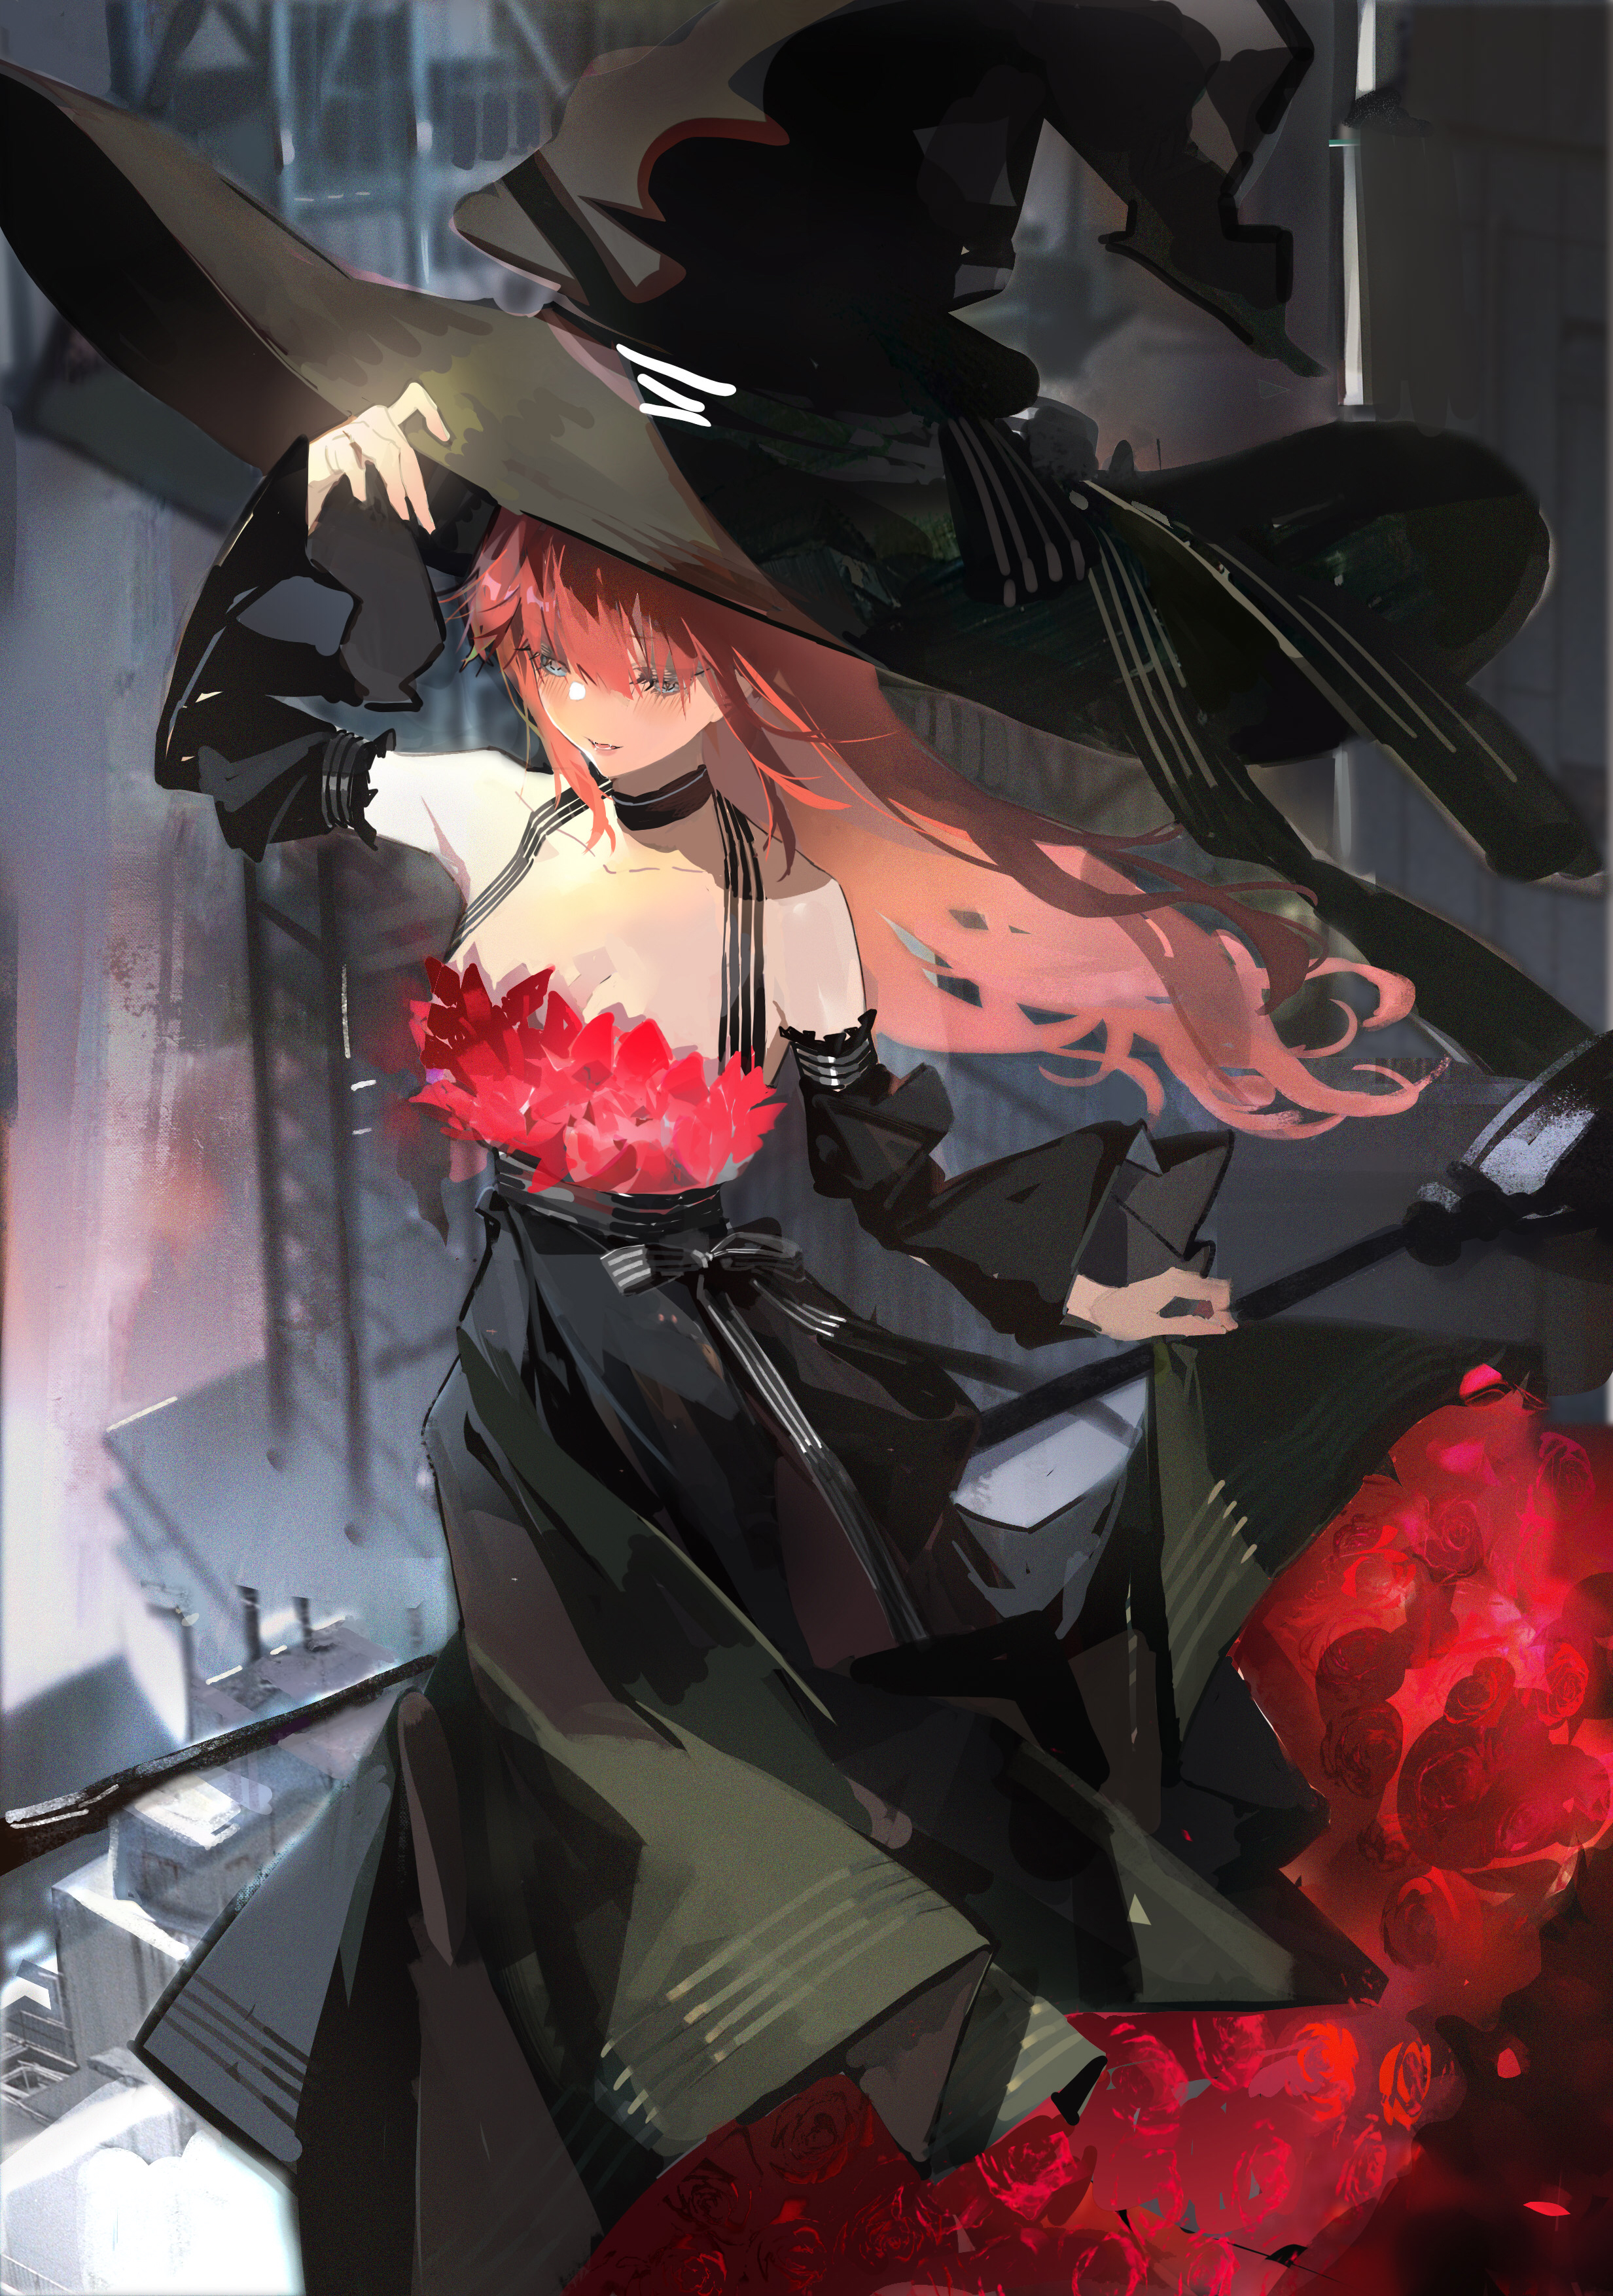 Anime 2465x3508 anime anime girls Songruan witch witch hat dress redhead